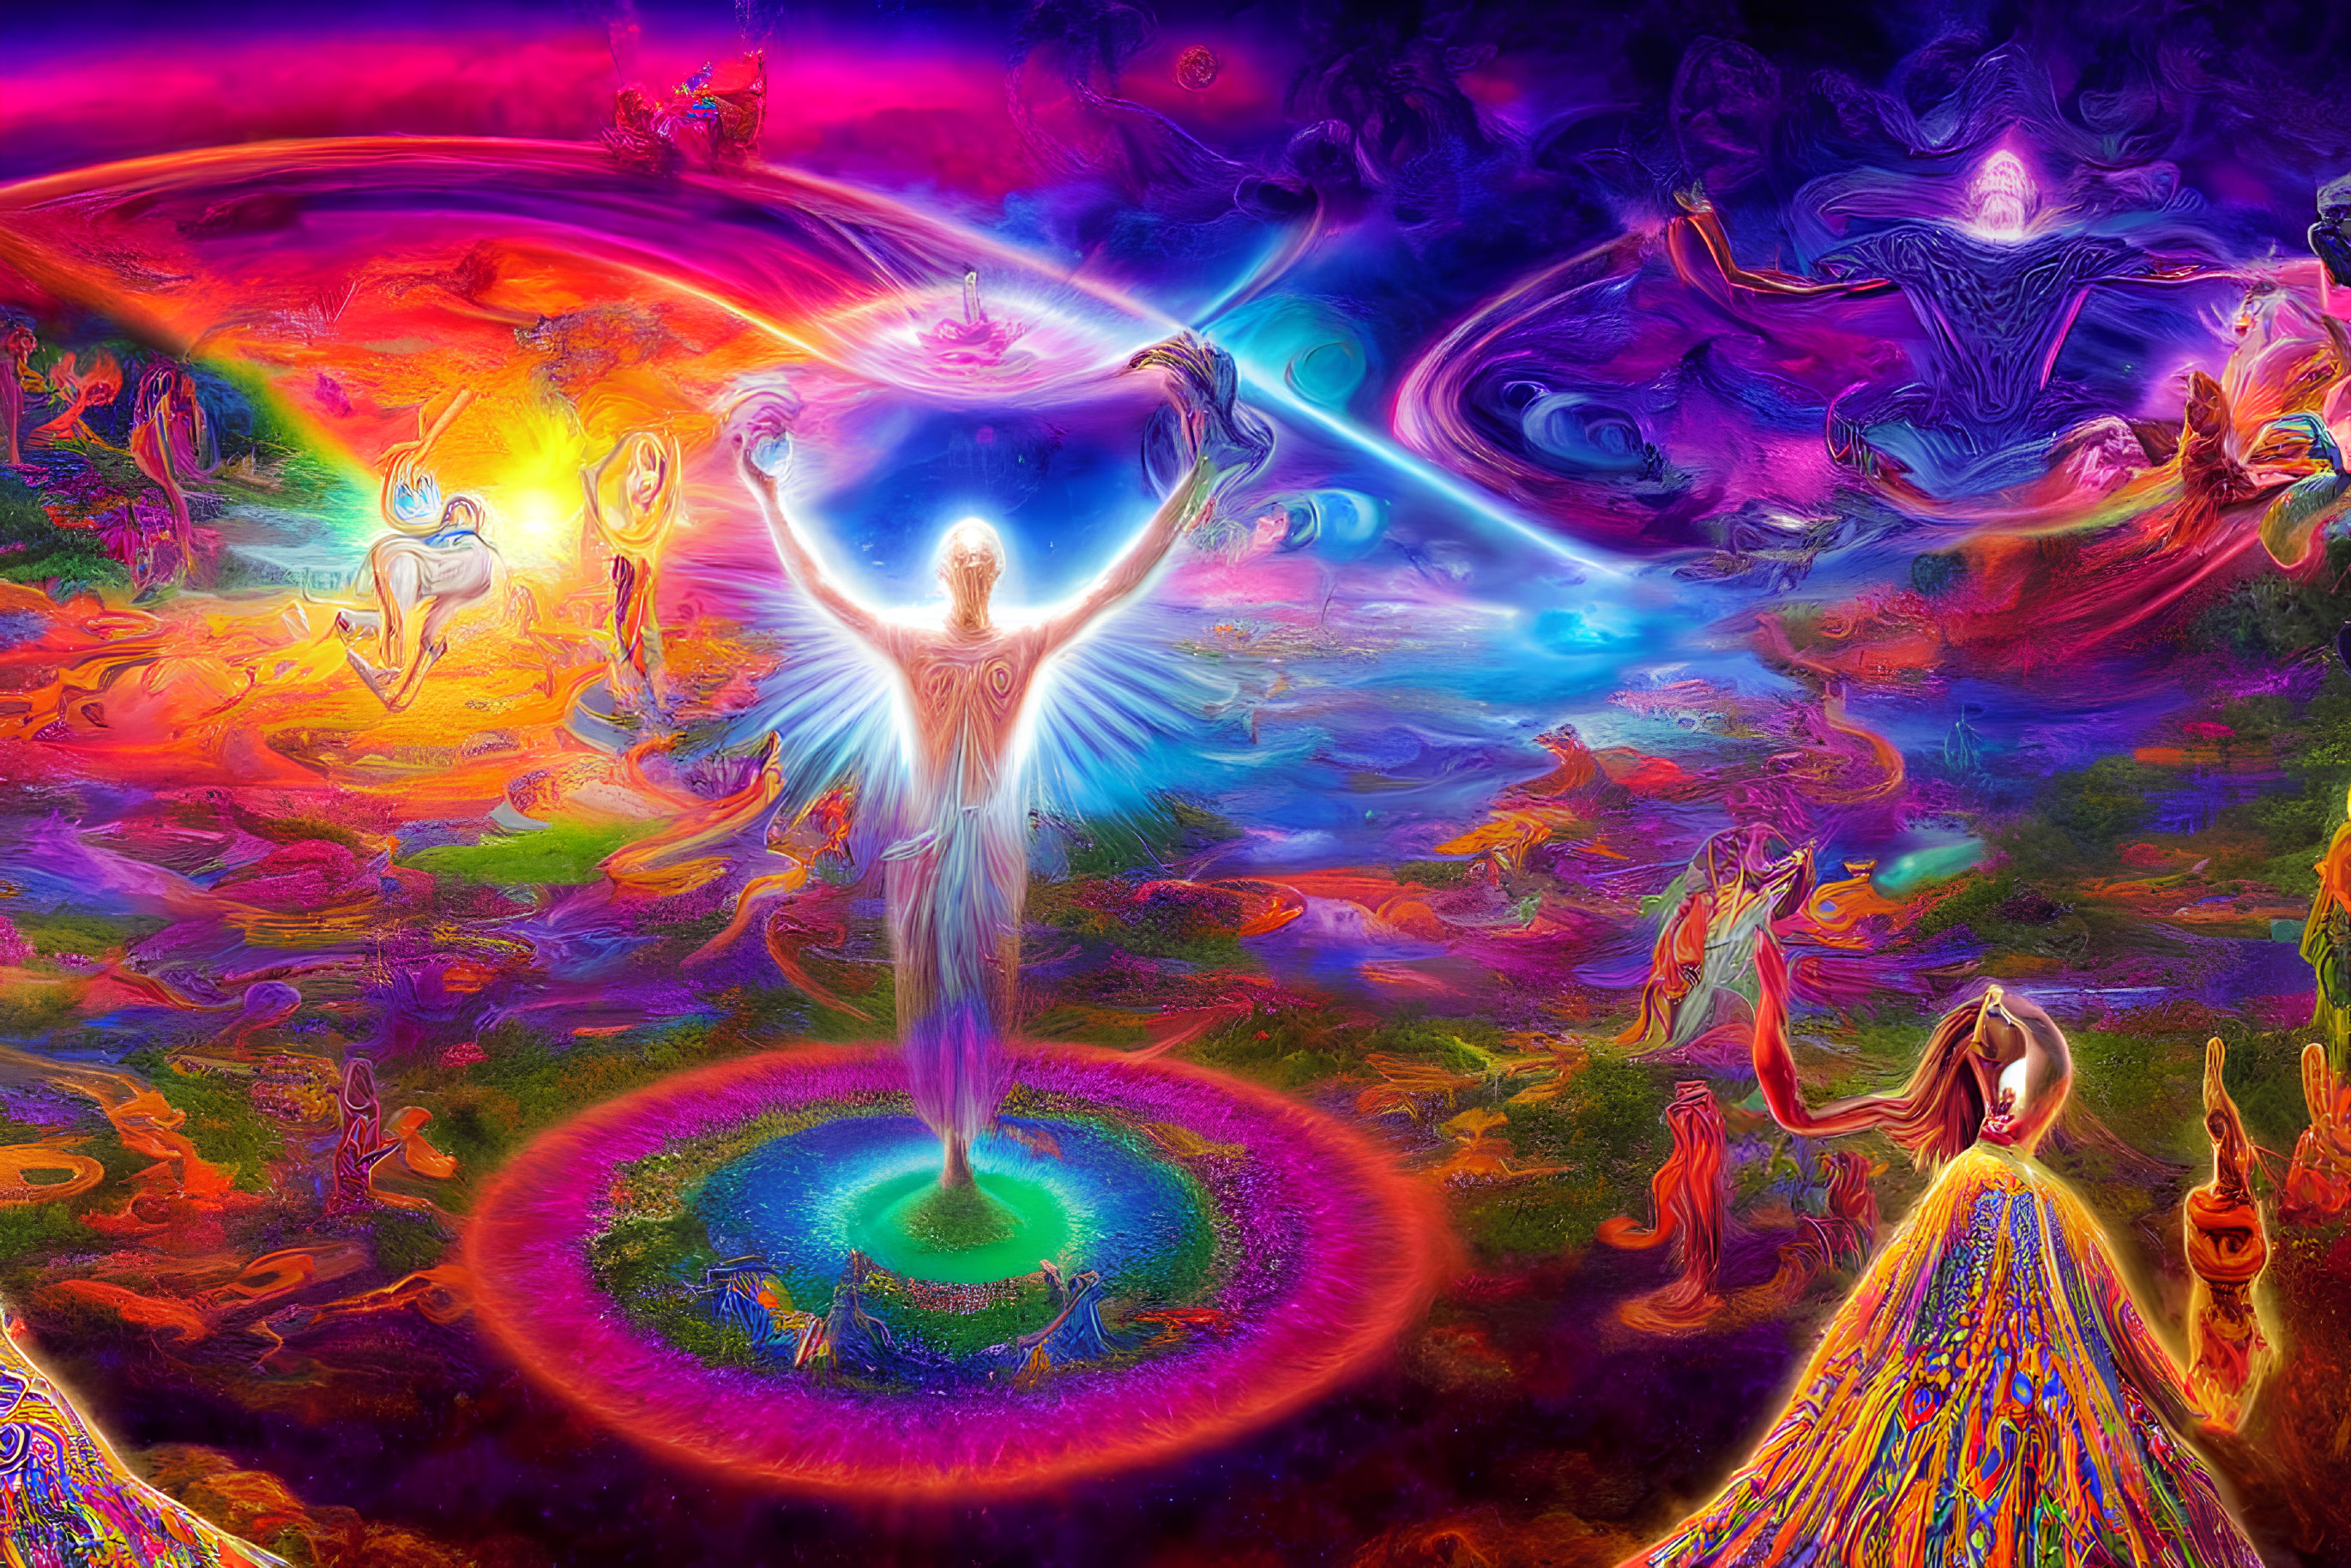 Colorful Psychedelic Artwork with Radiant Human Figure Among Cosmic Shapes